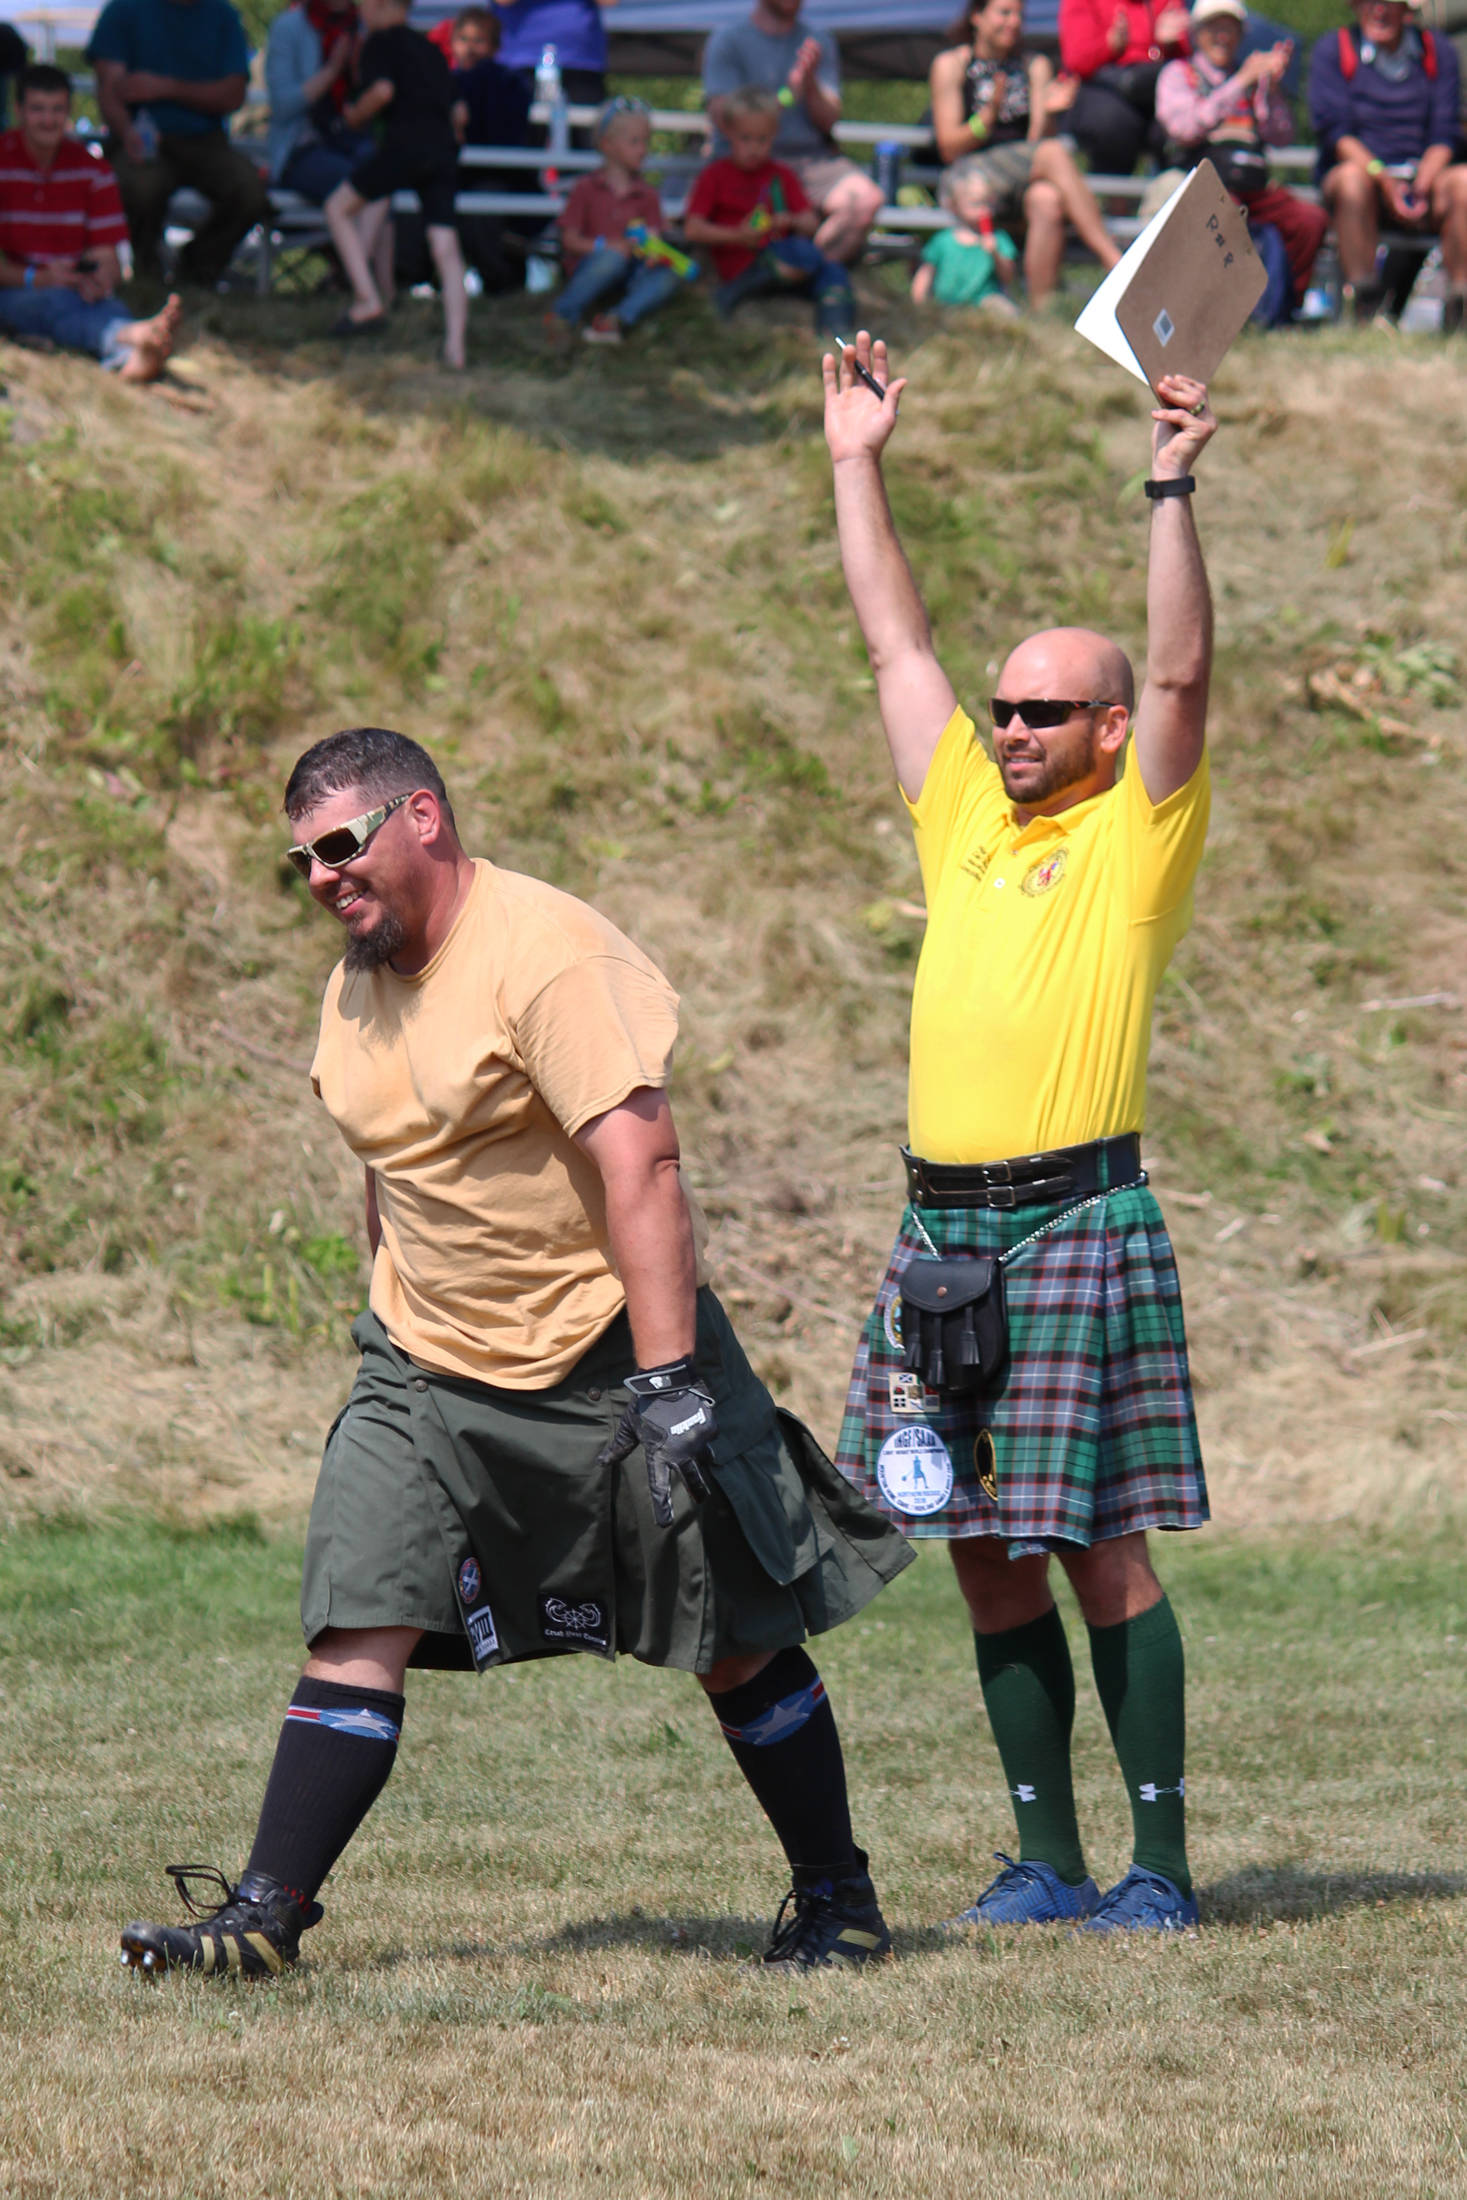 A judge throws his arms into the air to indicate that Danny Autrey, left, earned a perfect score in the men’s caber toss by throwing the caber so that it flipped once and landed in the 12 o’clock position, or directly in front of the athlete, on Saturday, July 6, 2019 at Karen Hornaday Park in Homer, Alaska. Autrey took first place in the Men’s Open class at the annual Kachemak Bay Highland Games held there. (Photo by Megan Pacer/Homer News)